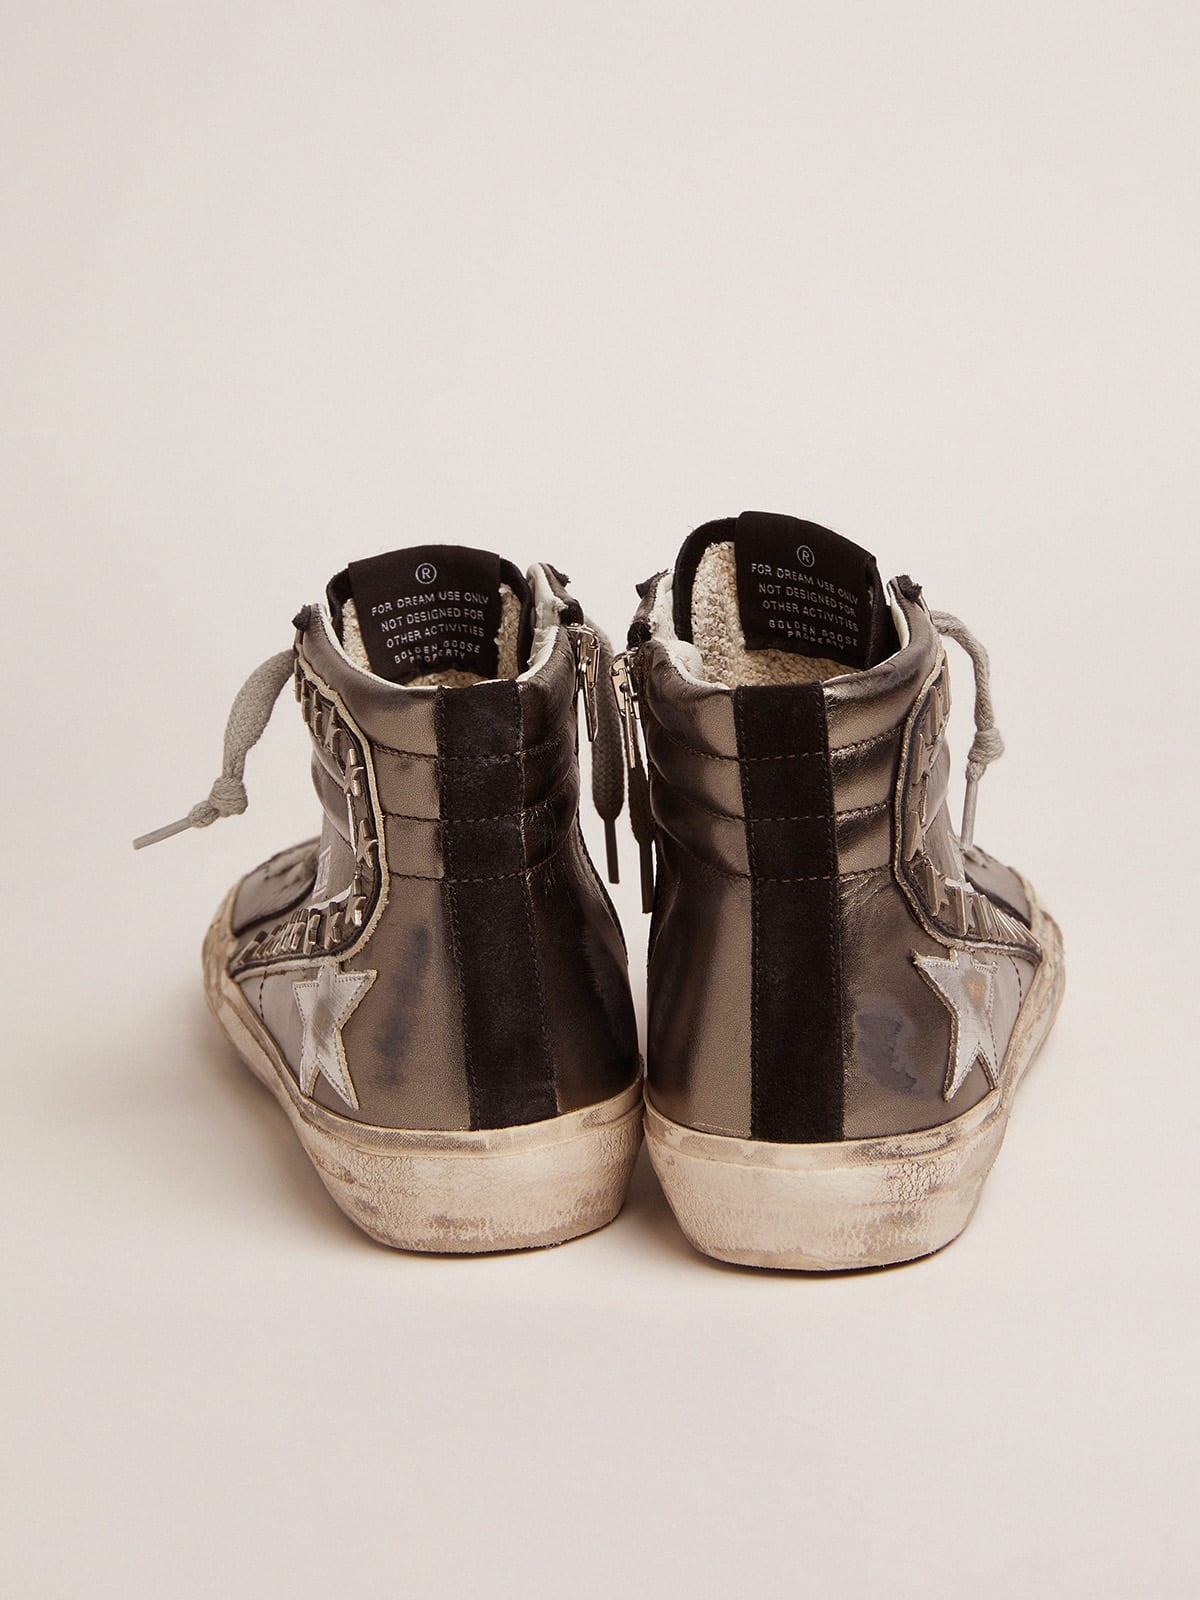 Slide sneakers with silver laminated leather upper and star-shaped studs - 5